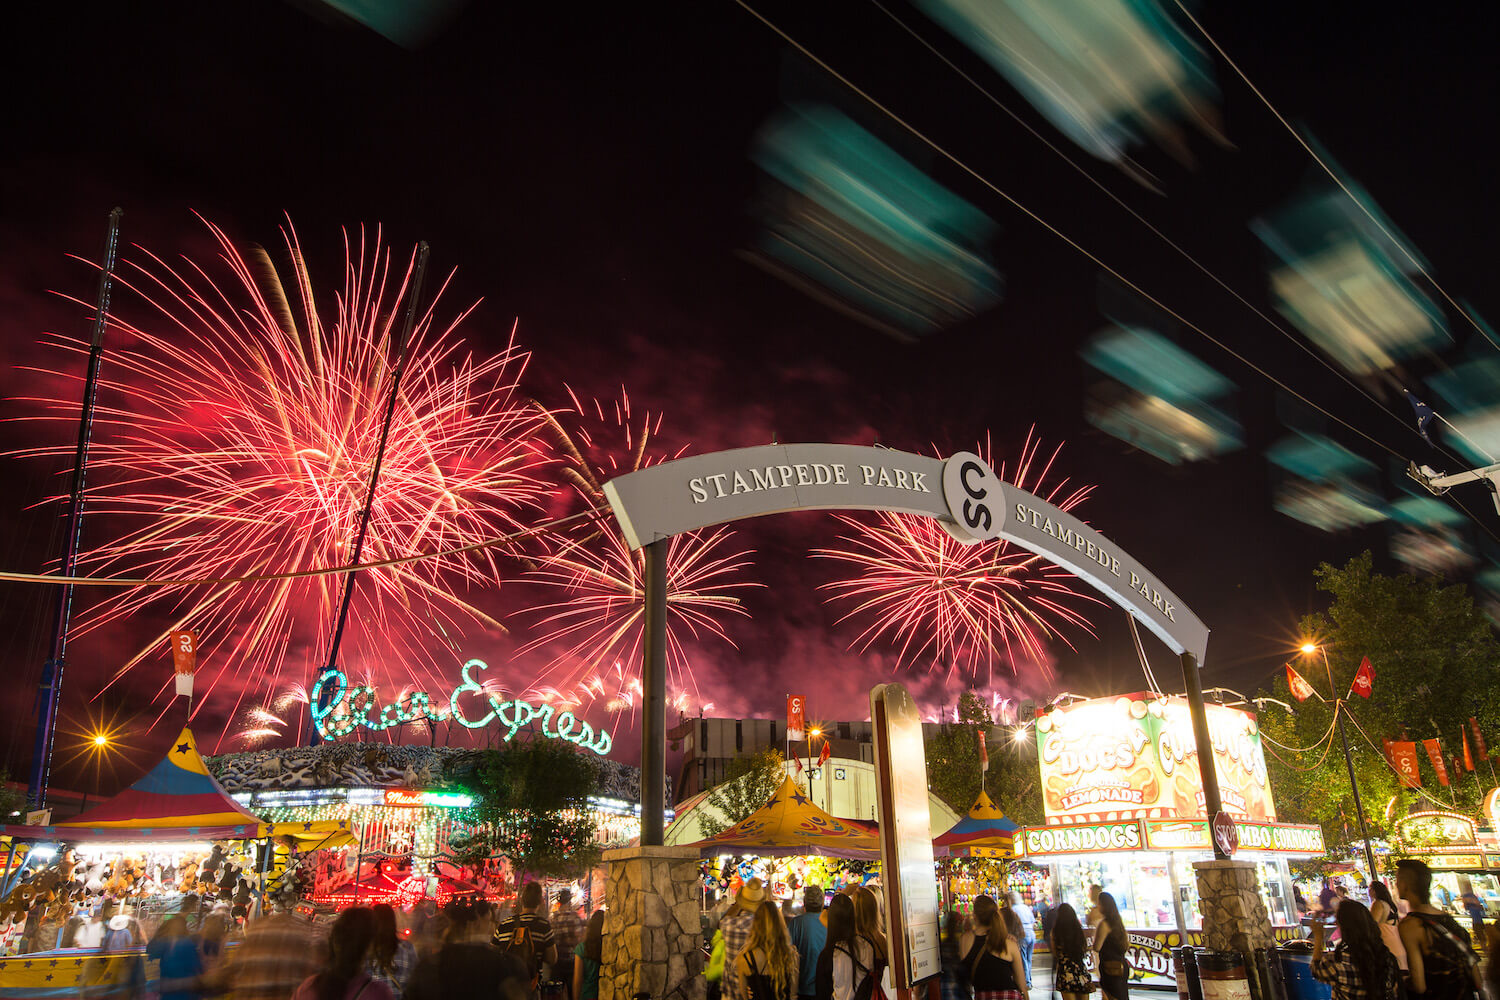 Successful consulting project with Calgary Stampede results in